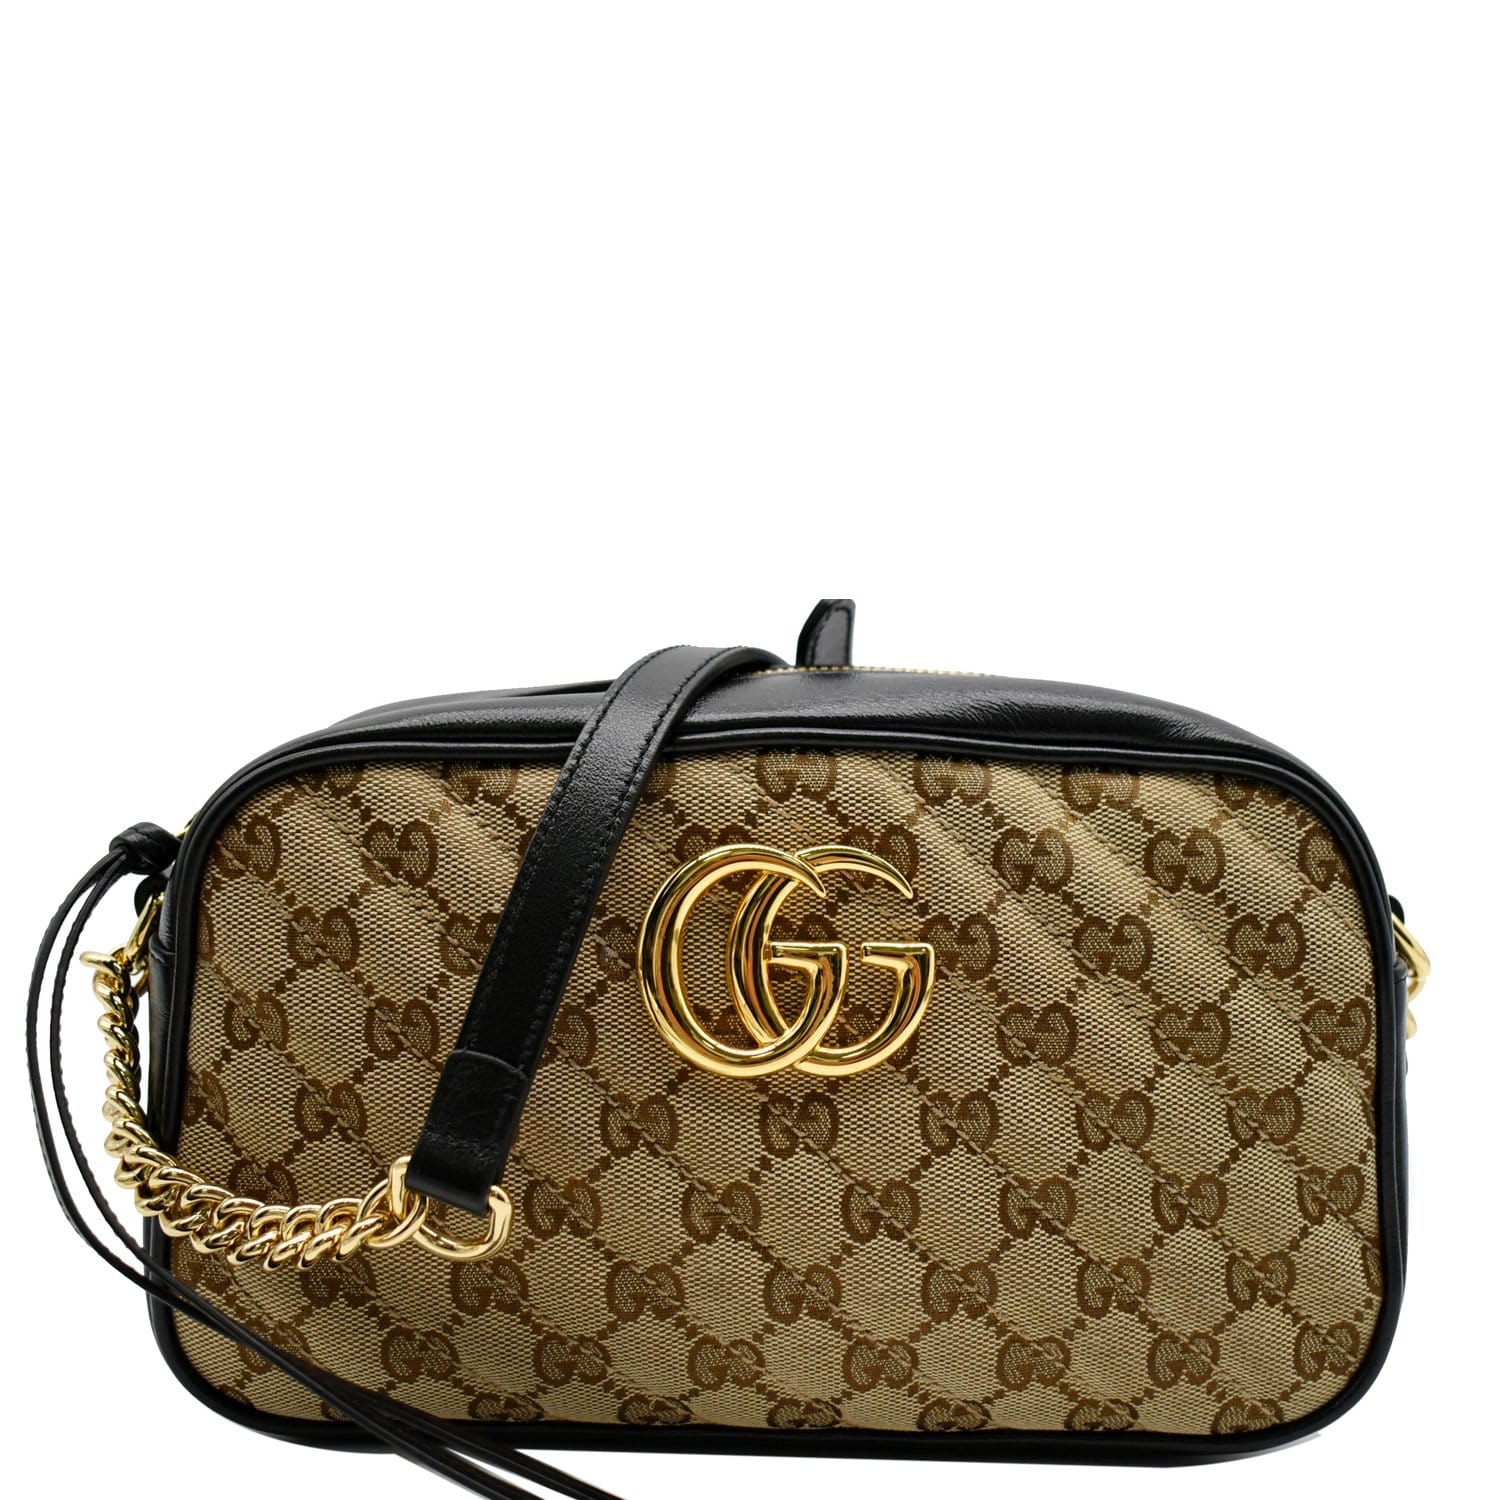 GG Marmont Small Shoulder Bag in Beige